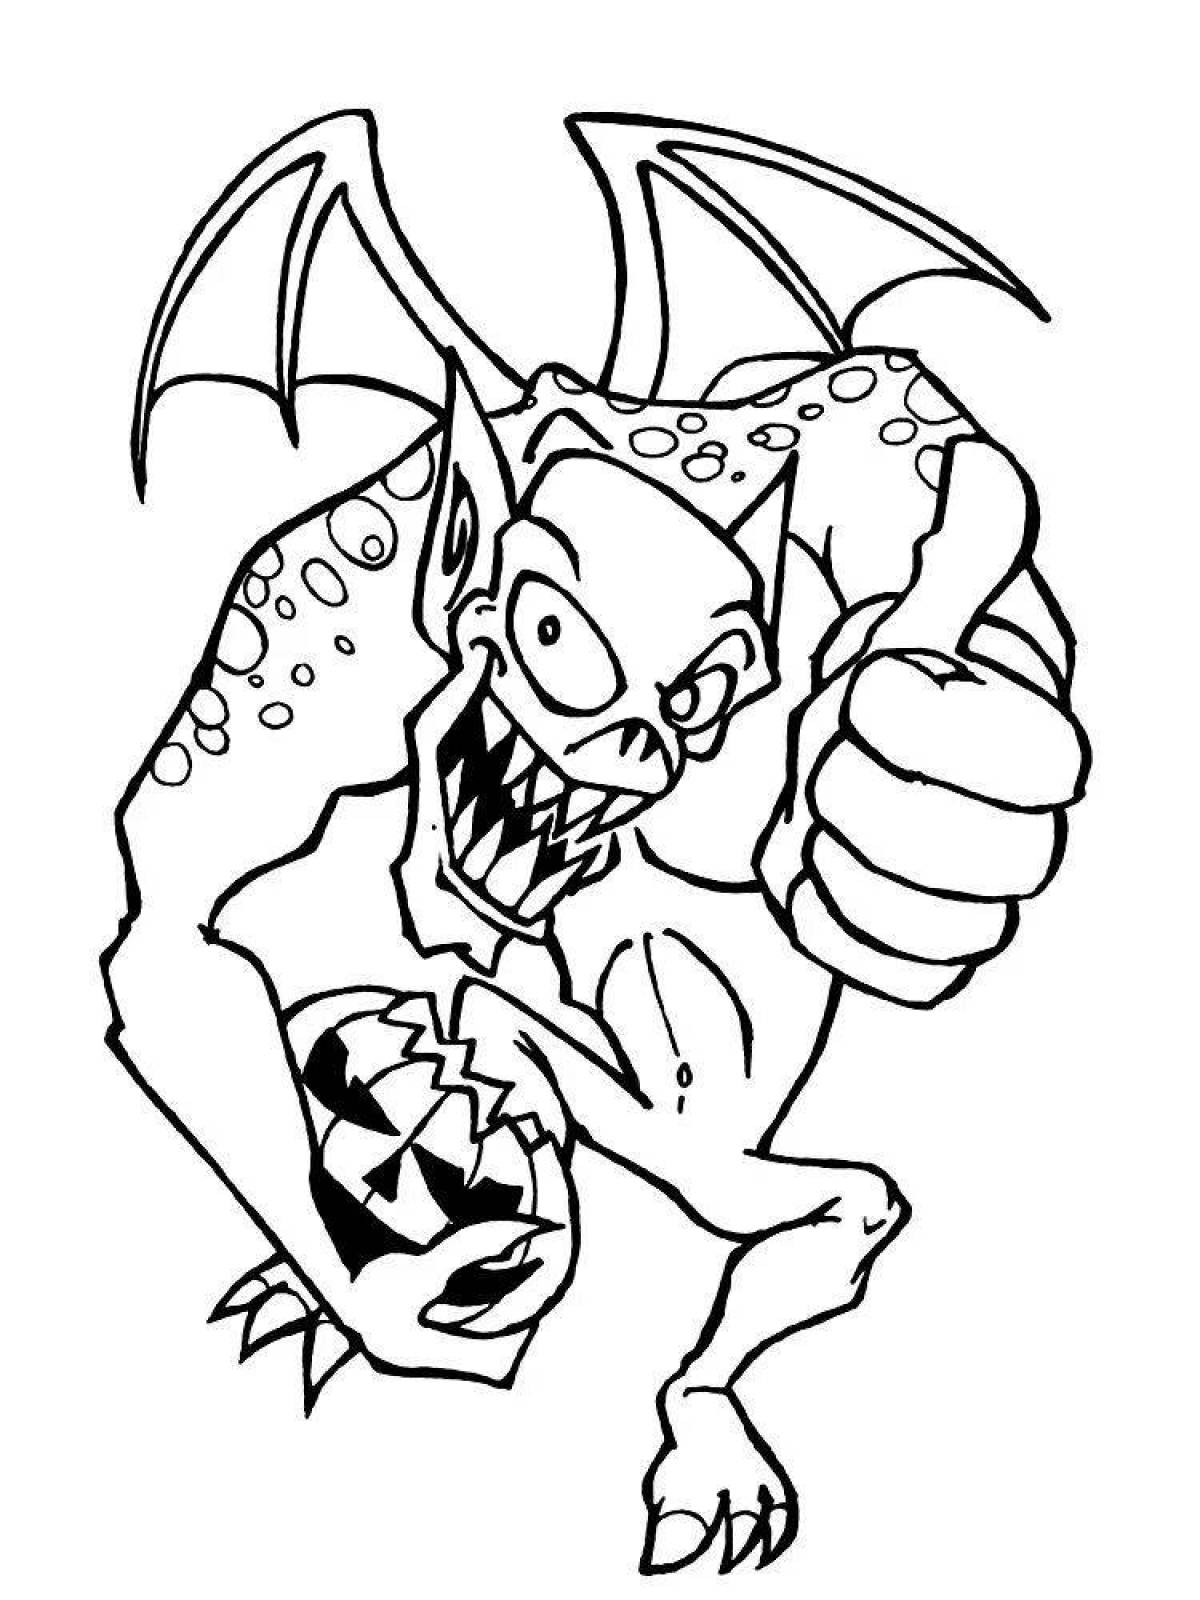 Coloring page nasty scary monsters